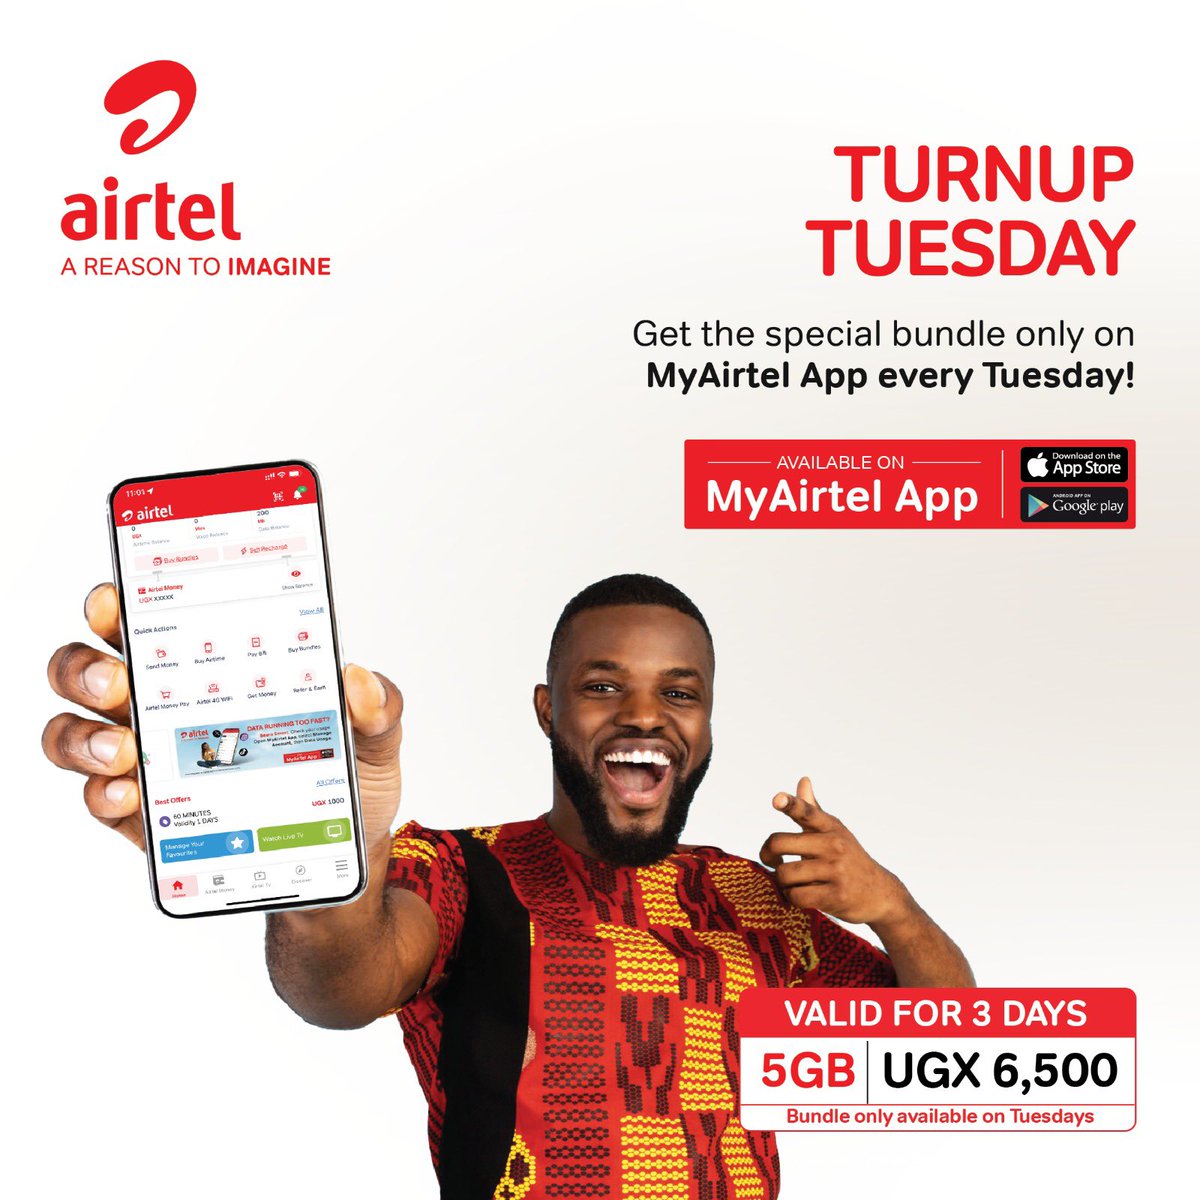 The #TurnUpTuesday offer is still available on the #MyAirtelApp via >>airtelafrica.onelink.me/cGyr/qgj4qeu2
Enjoy 5GB at only 6500/= valid for 3days🥳